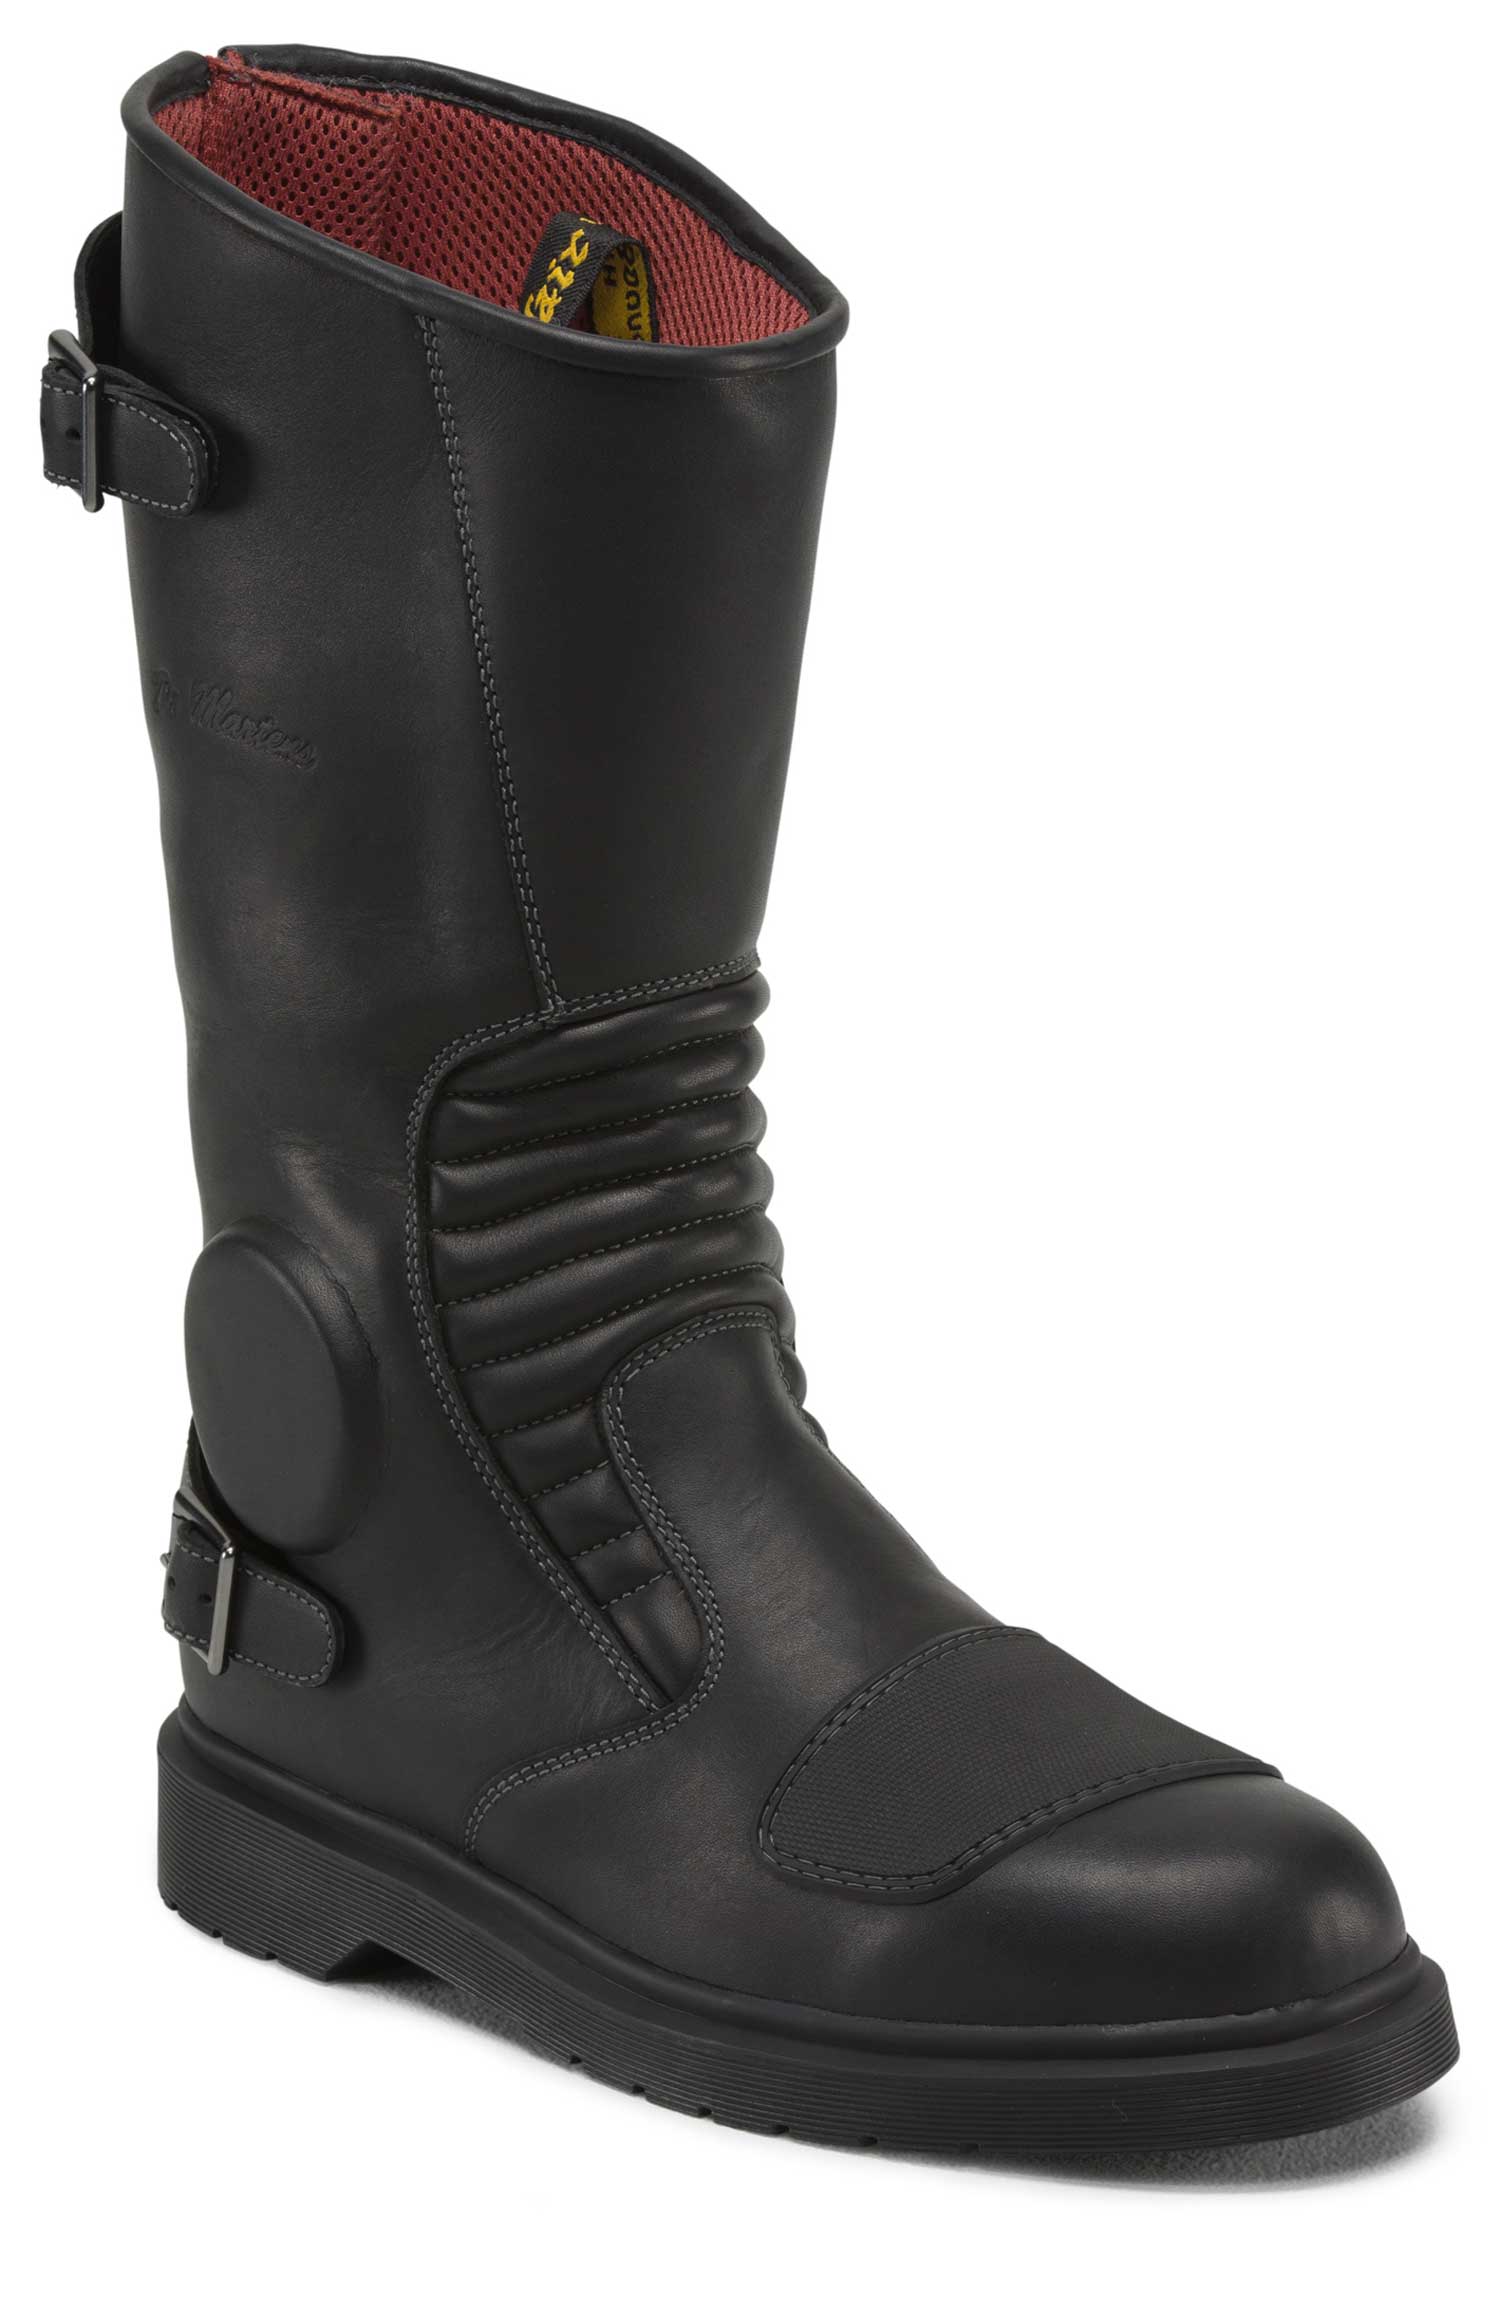 DR MARTEN GARRICK CLASSIC MOTORCYCLE LEATHER BOOTS D30 ARMOUR UK 9